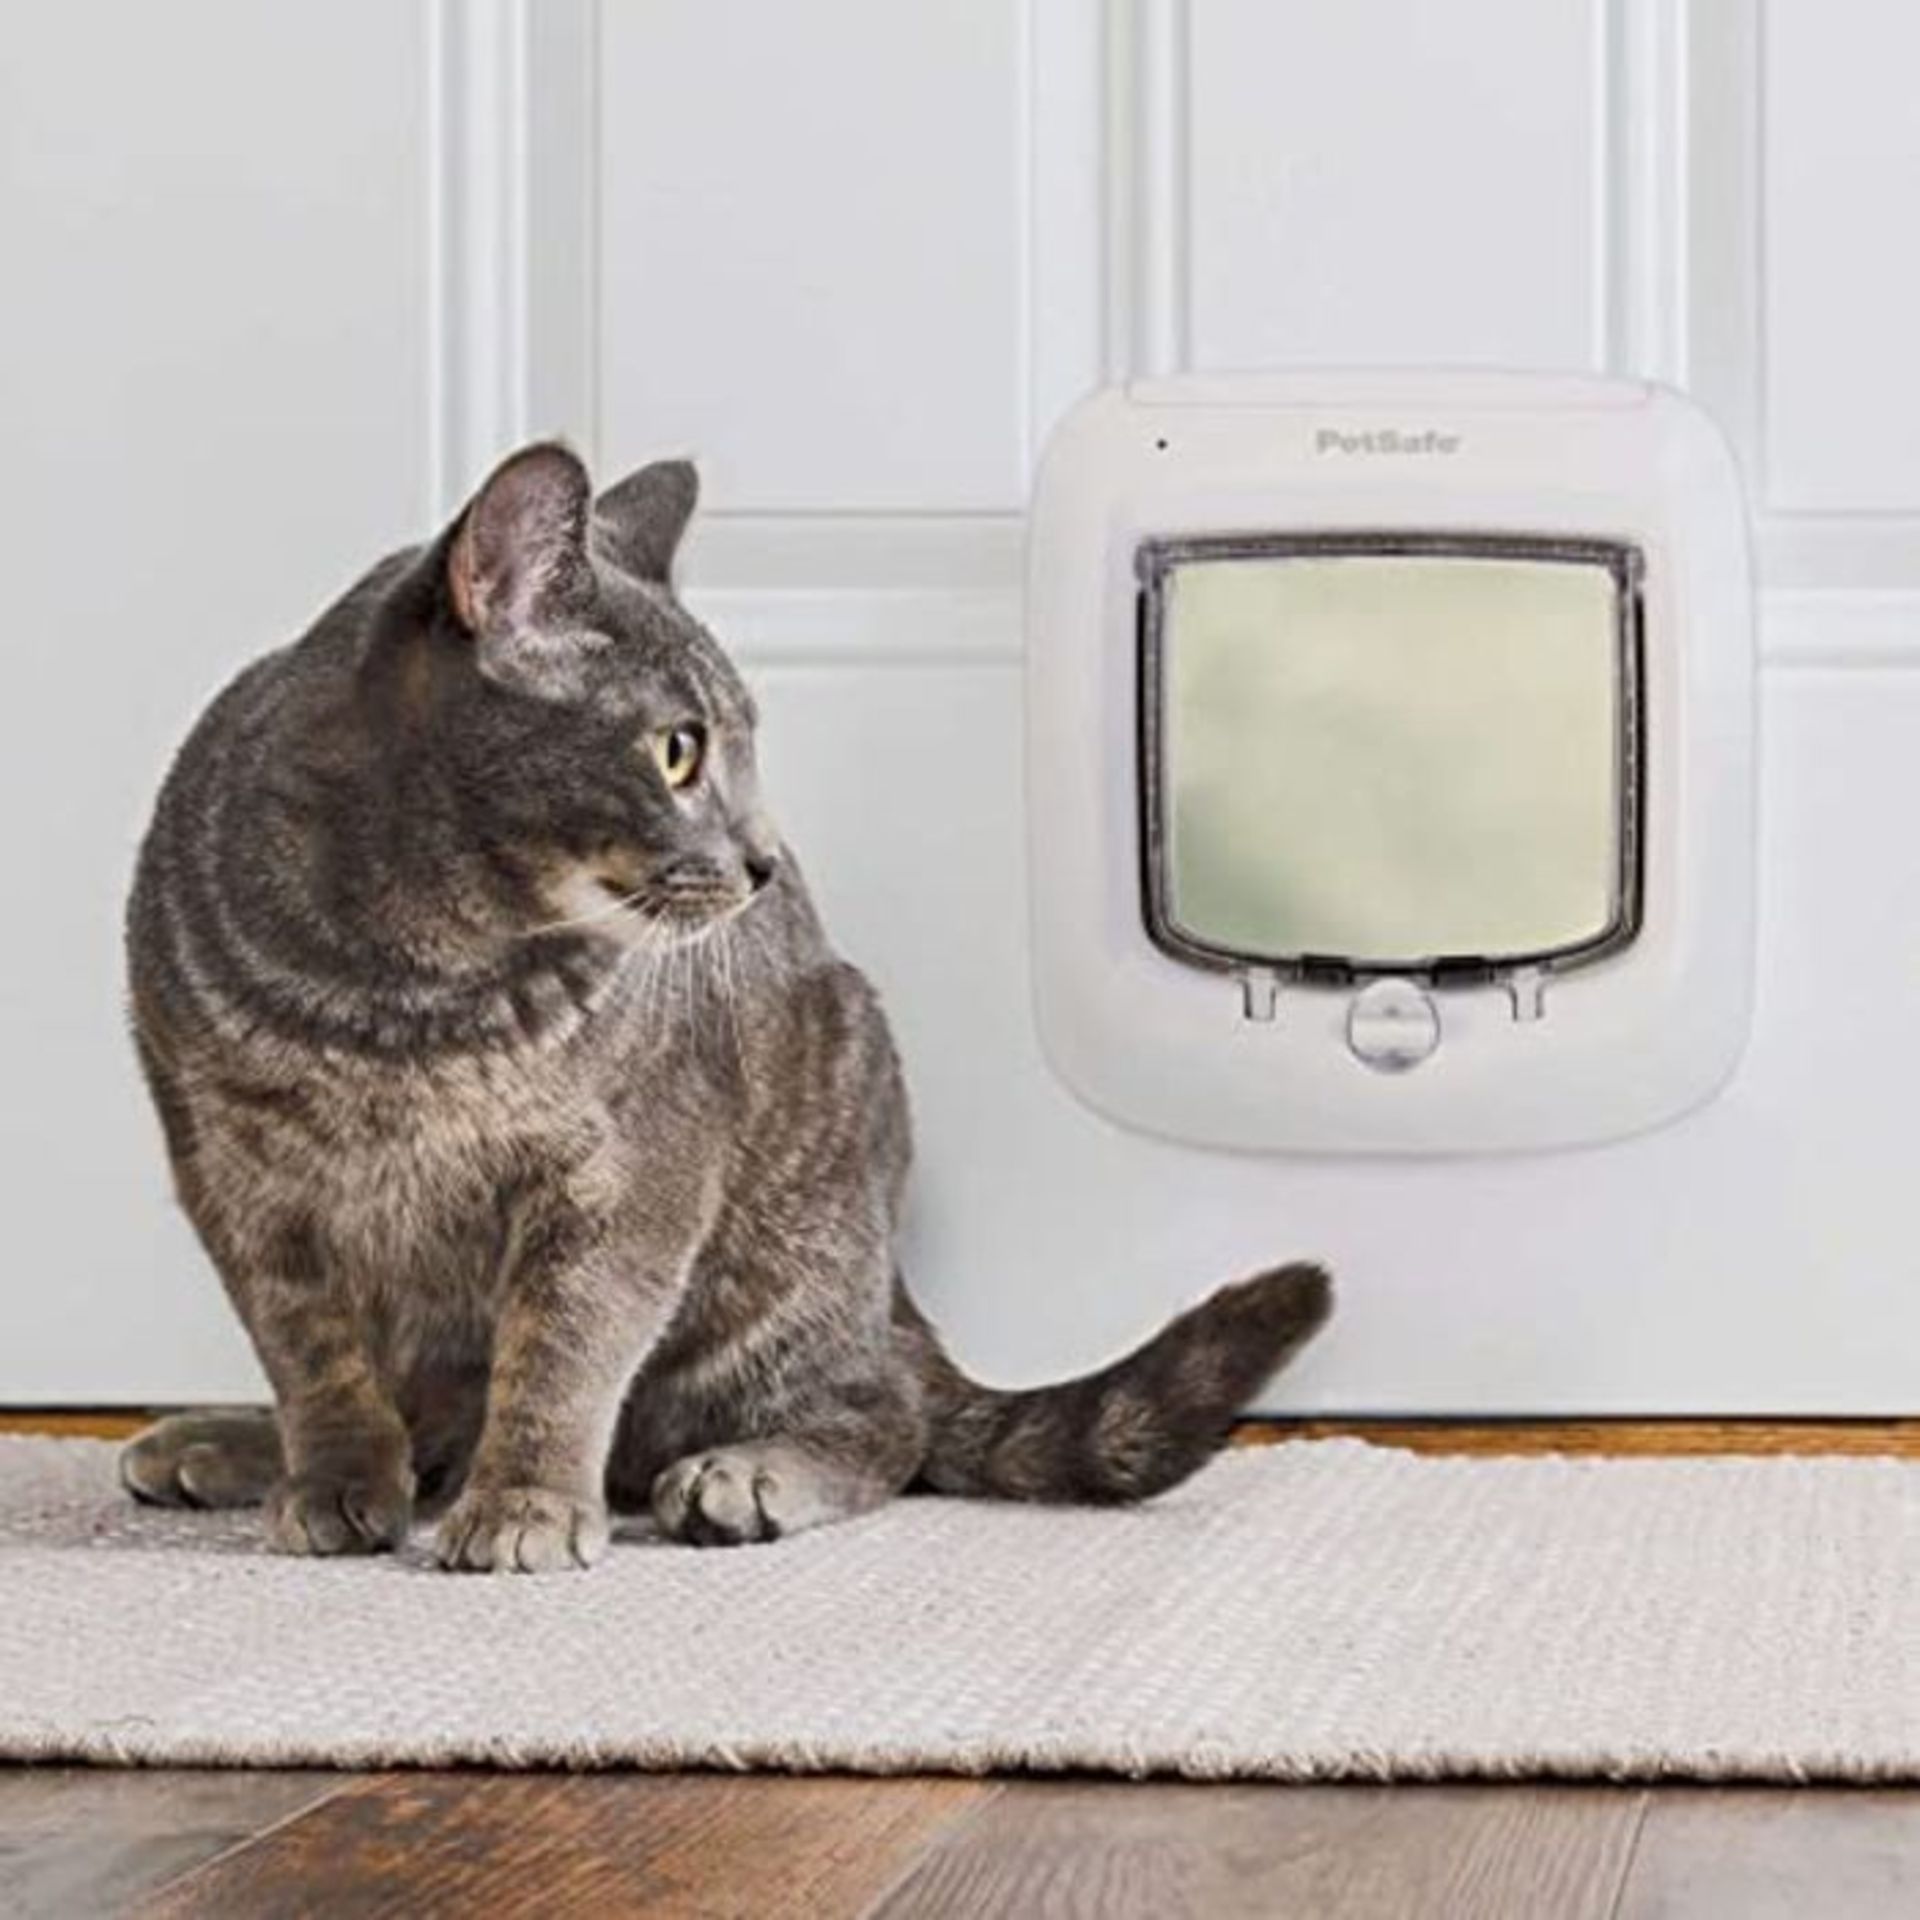 RRP £51.00 PetSafe Microchip Cat Flap, Battery Powered Pet Door, 4-Way Locking and Easy Installat - Image 4 of 6